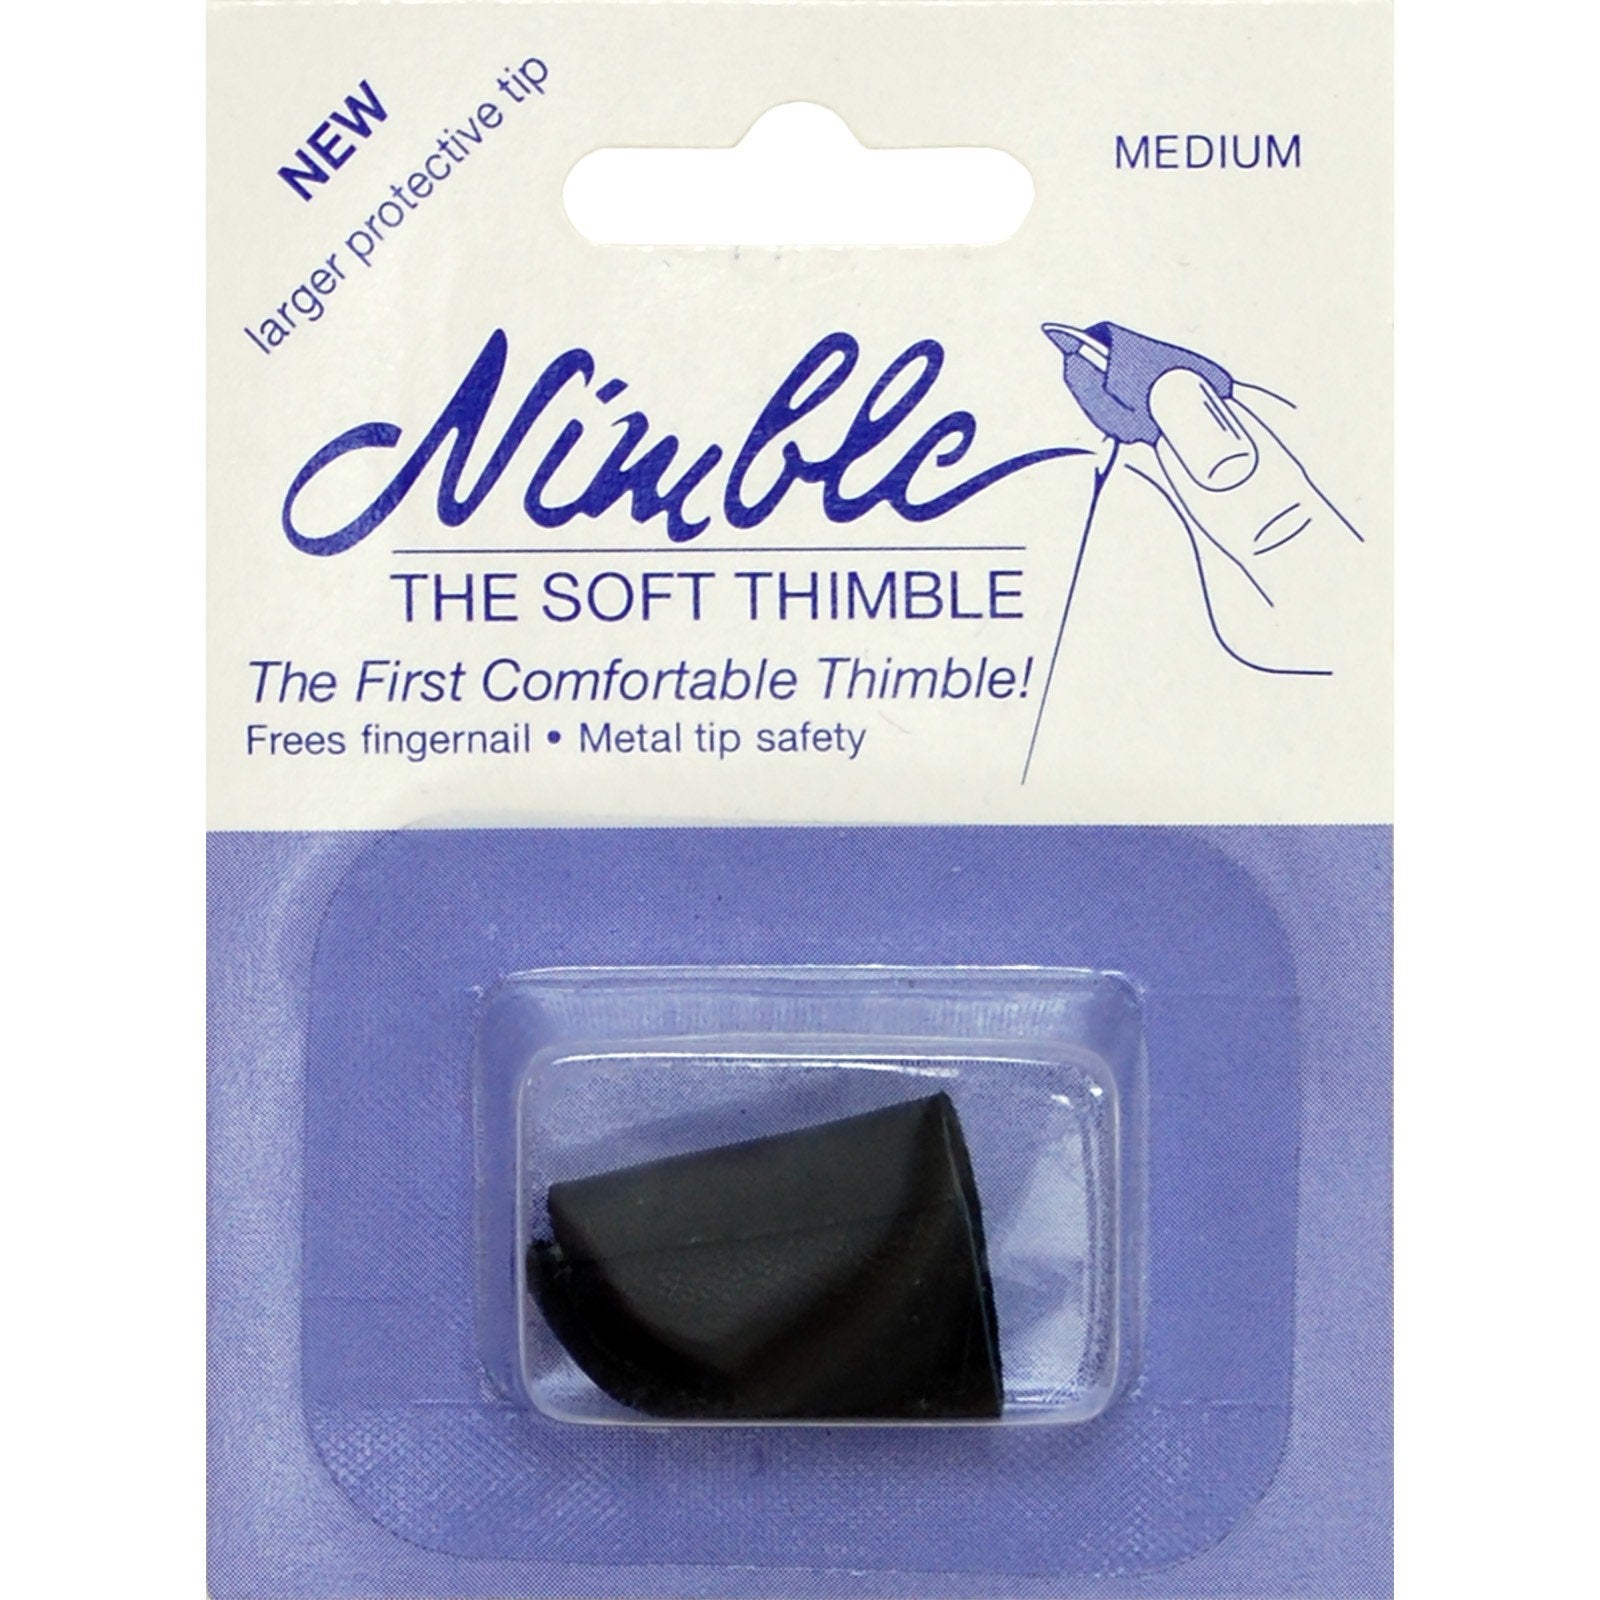 Adhesive Leather Thimble Pad by Colonial